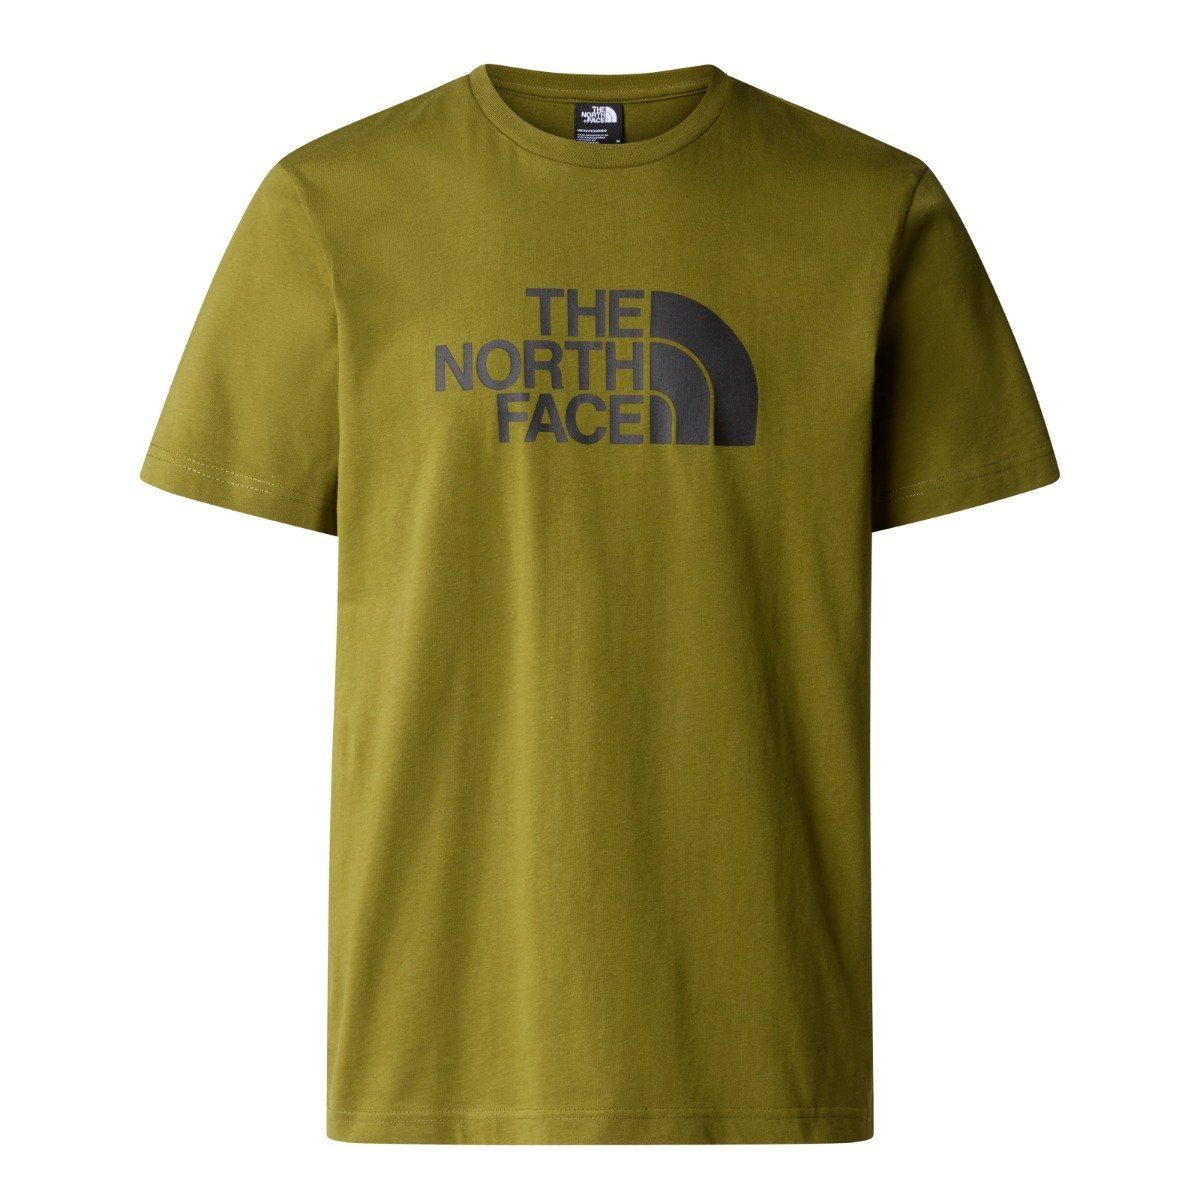 The North Face - M's S/S Easy Tee